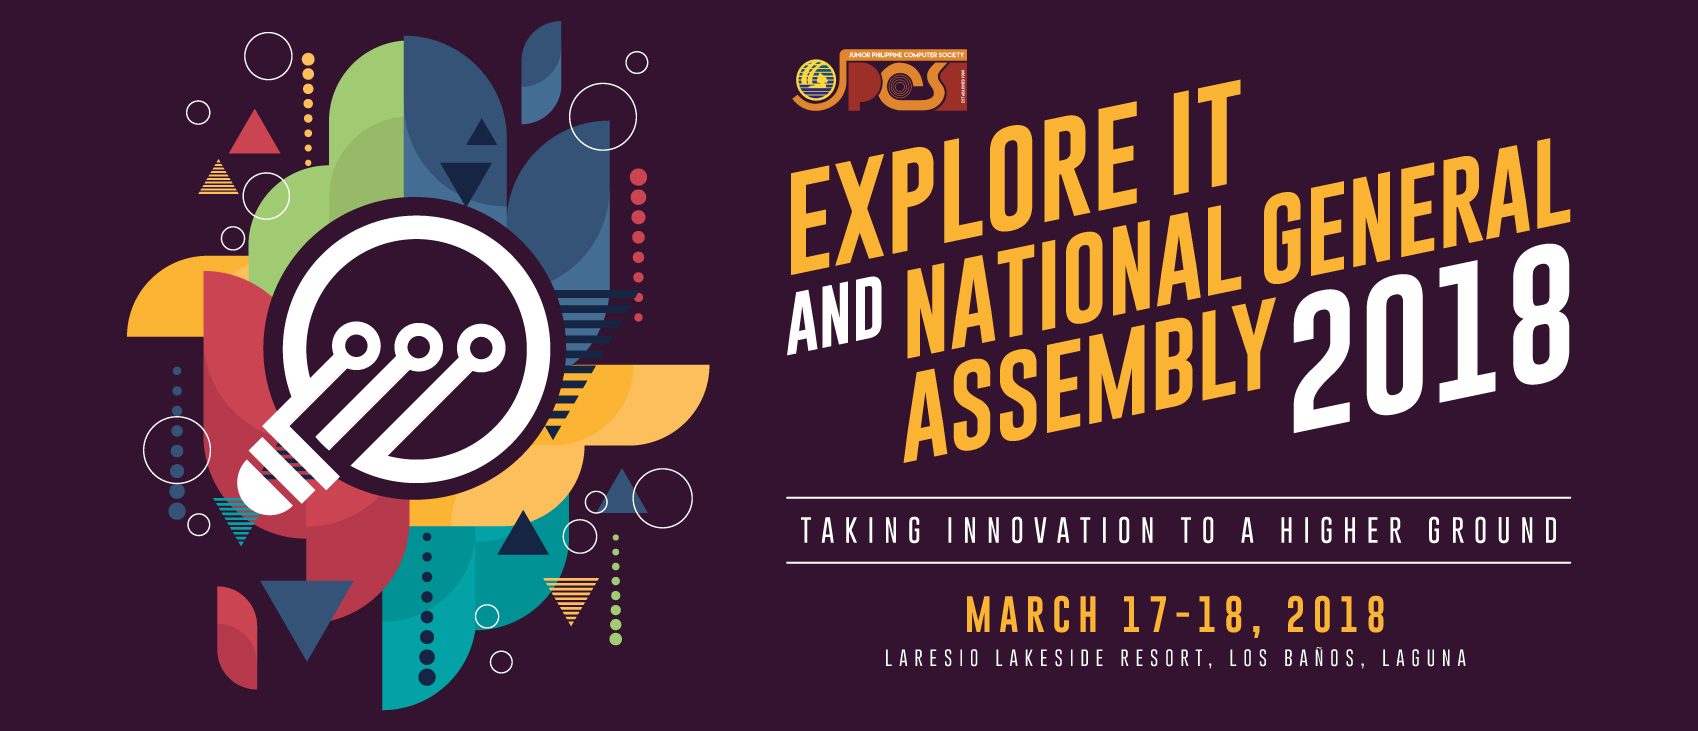 JPCS Explore IT and National General Assembly 2018